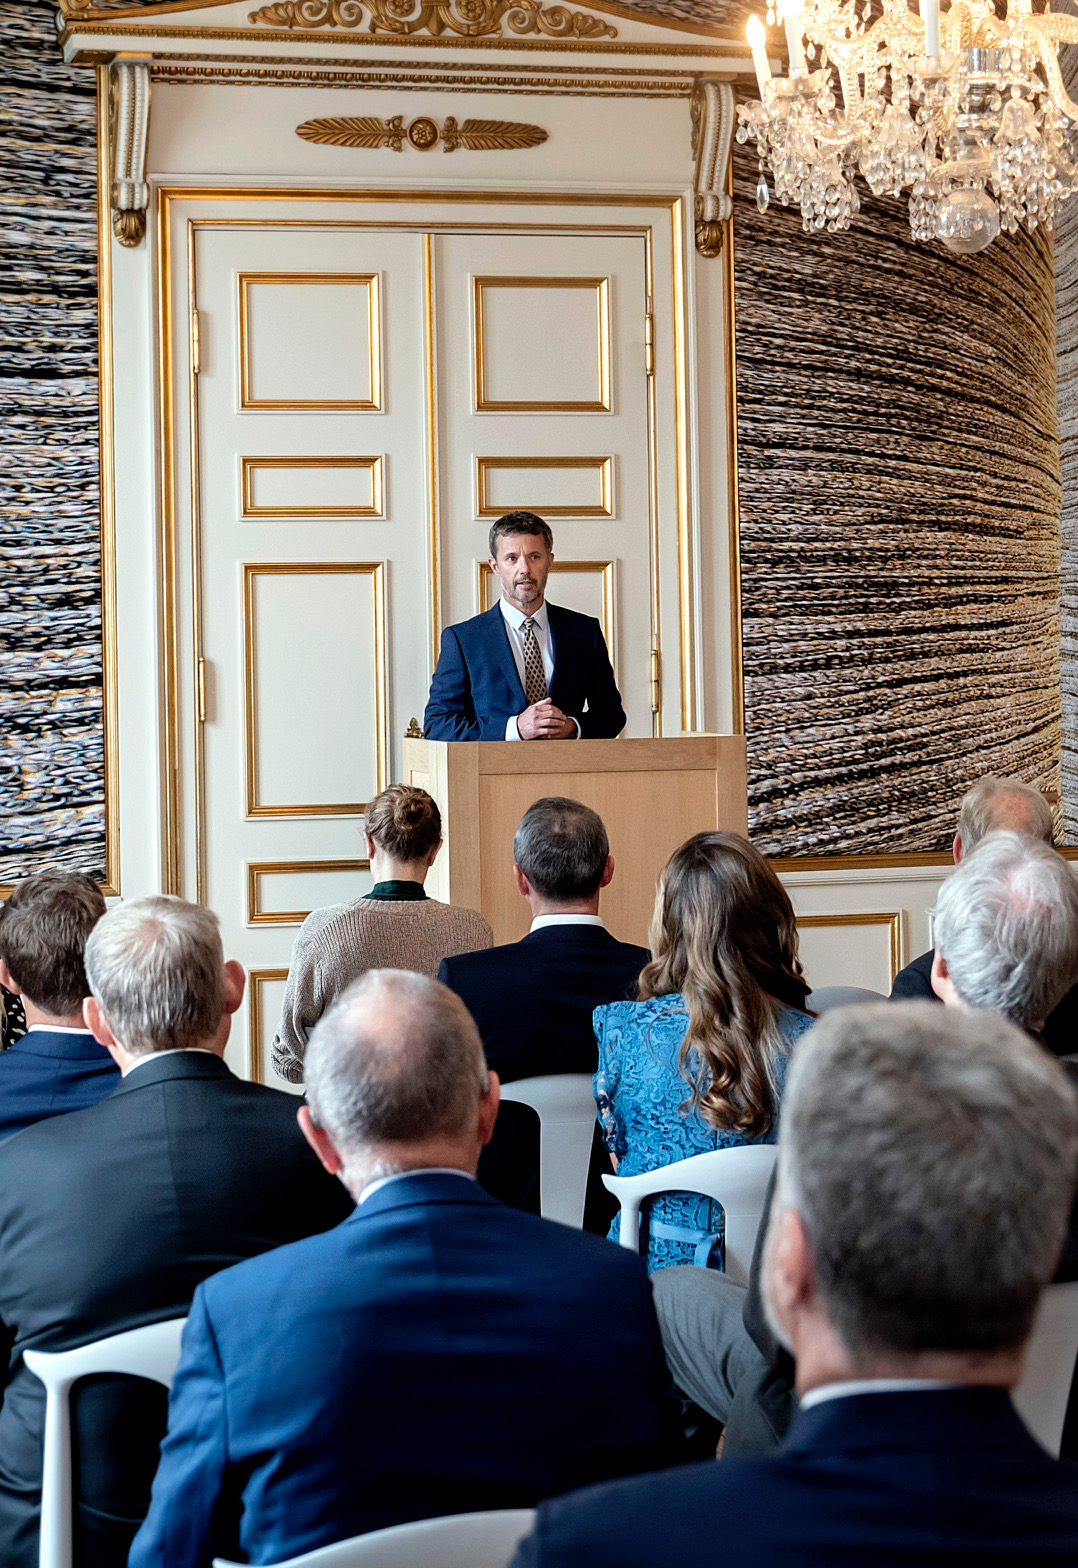 Danish subsidiaries honored at Amalienborg Palace for exceptional export efforts